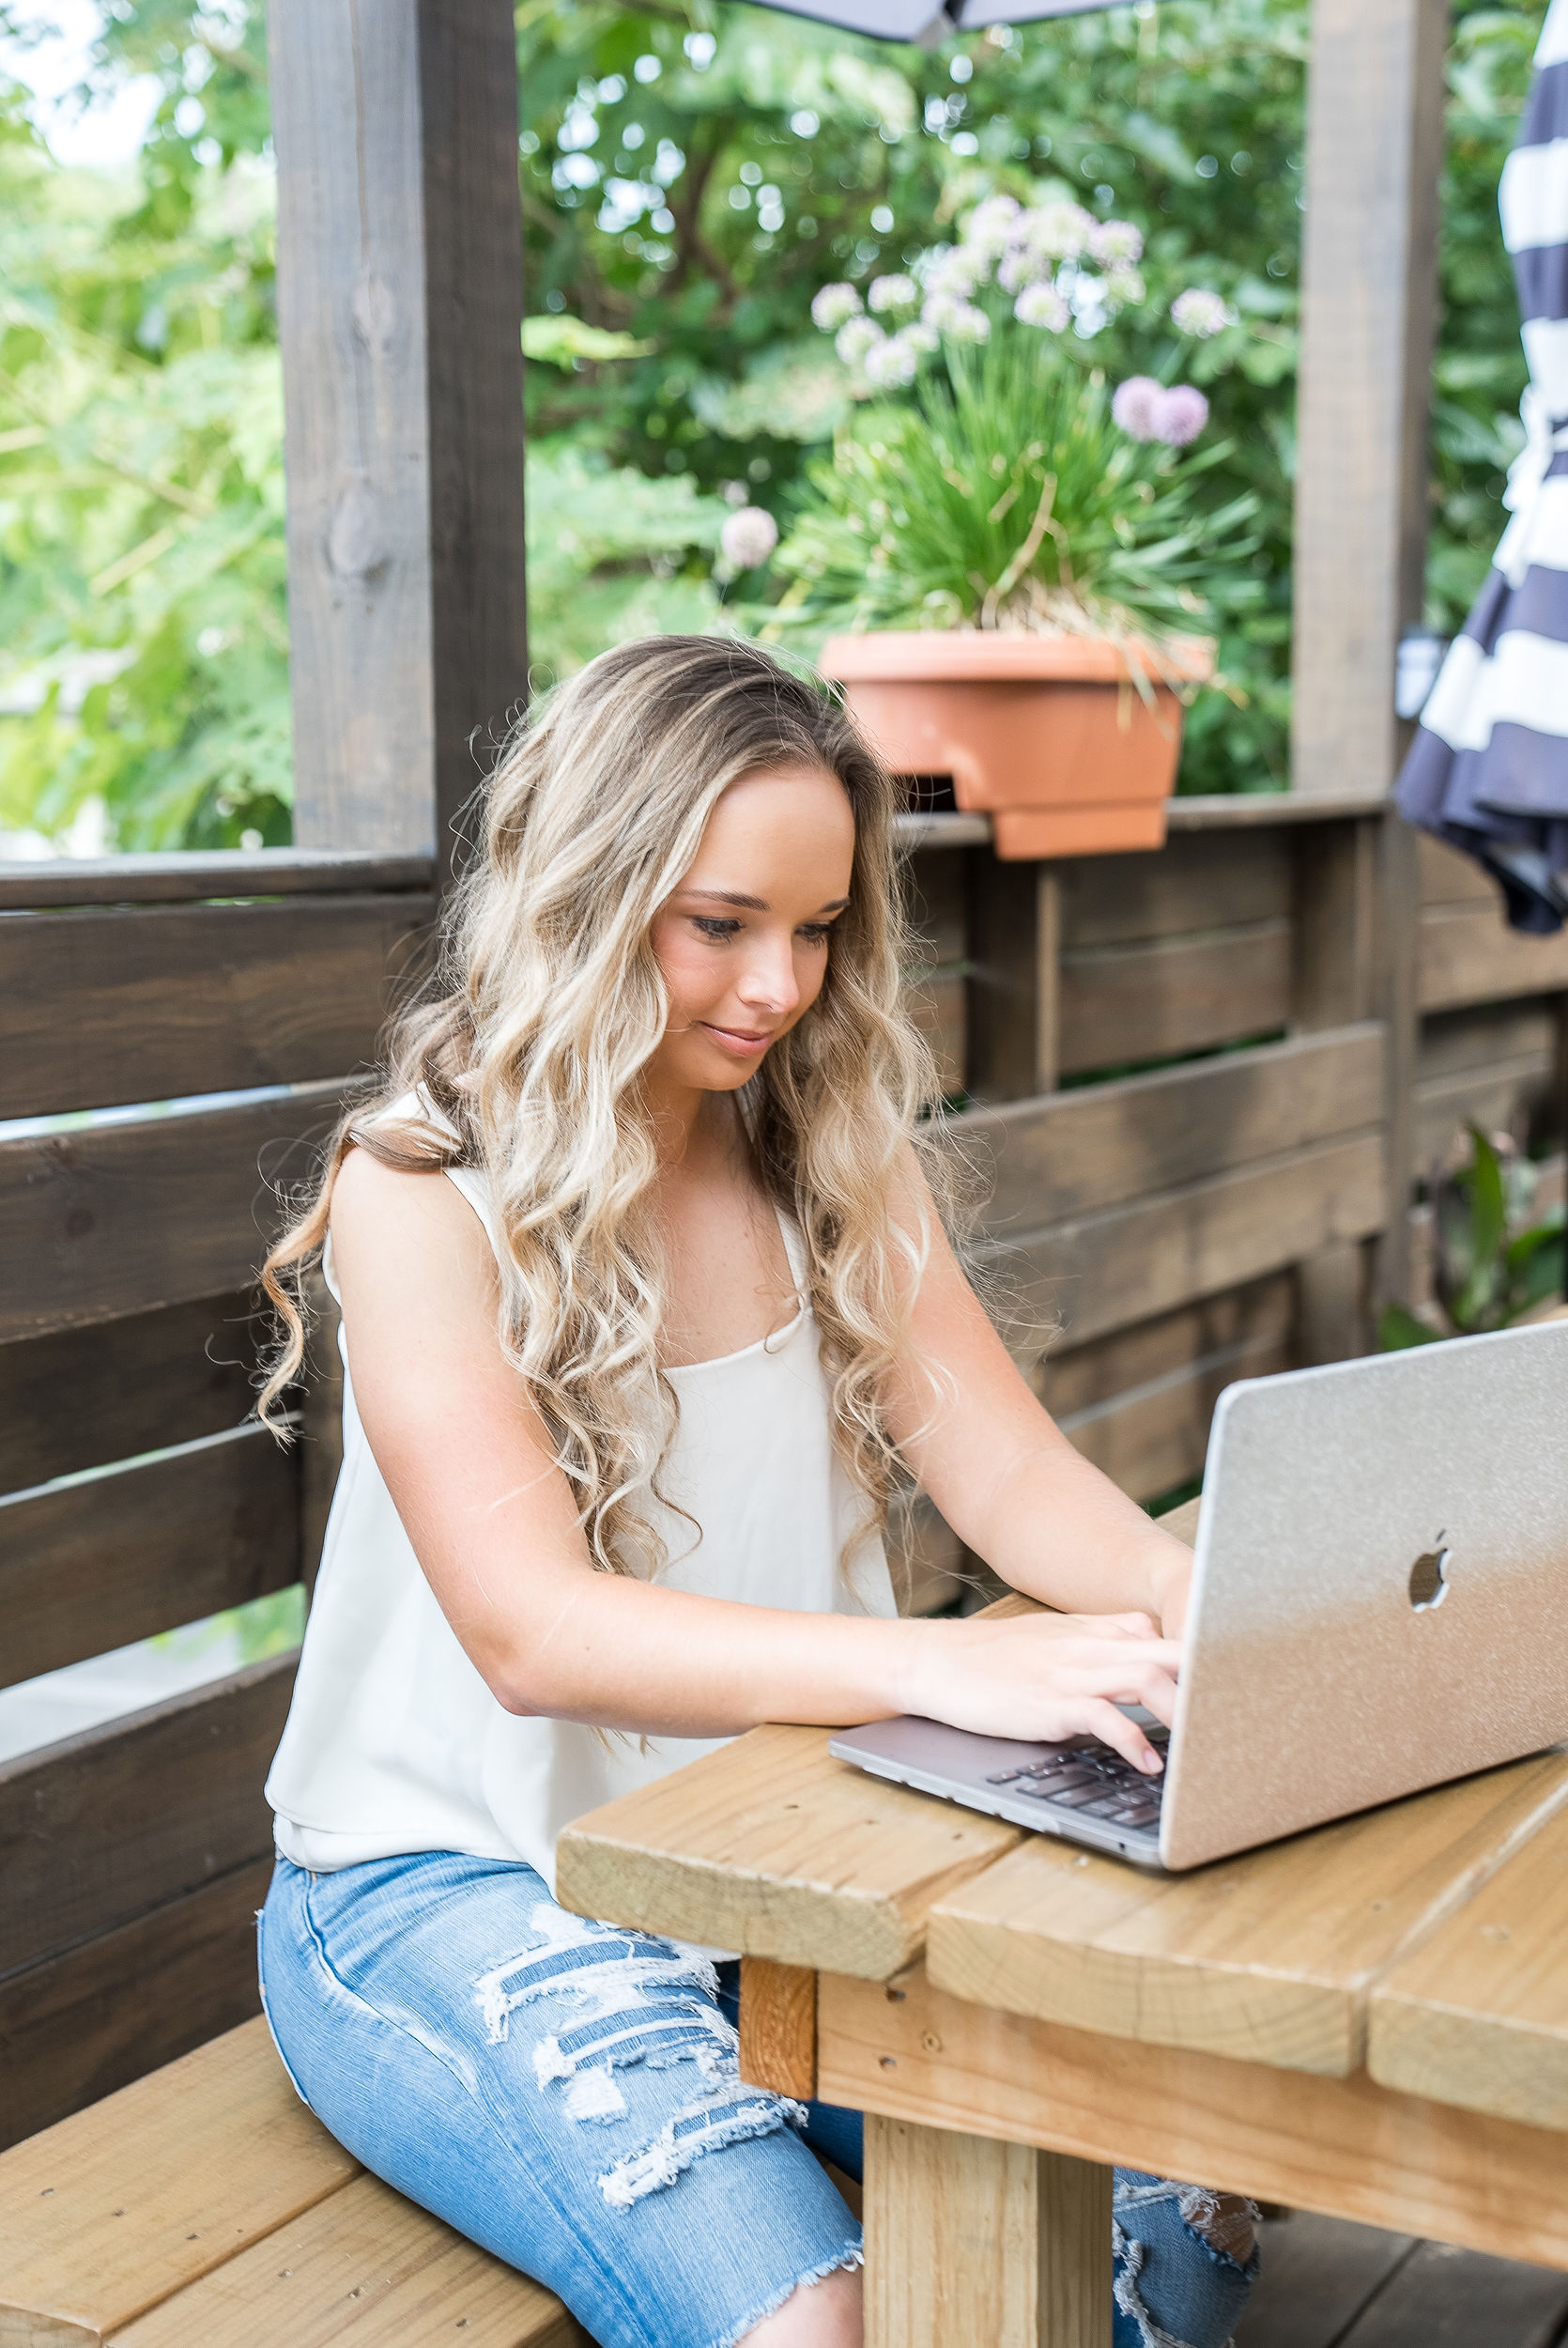 image of girl with wavey hair typing on laptop outdoors